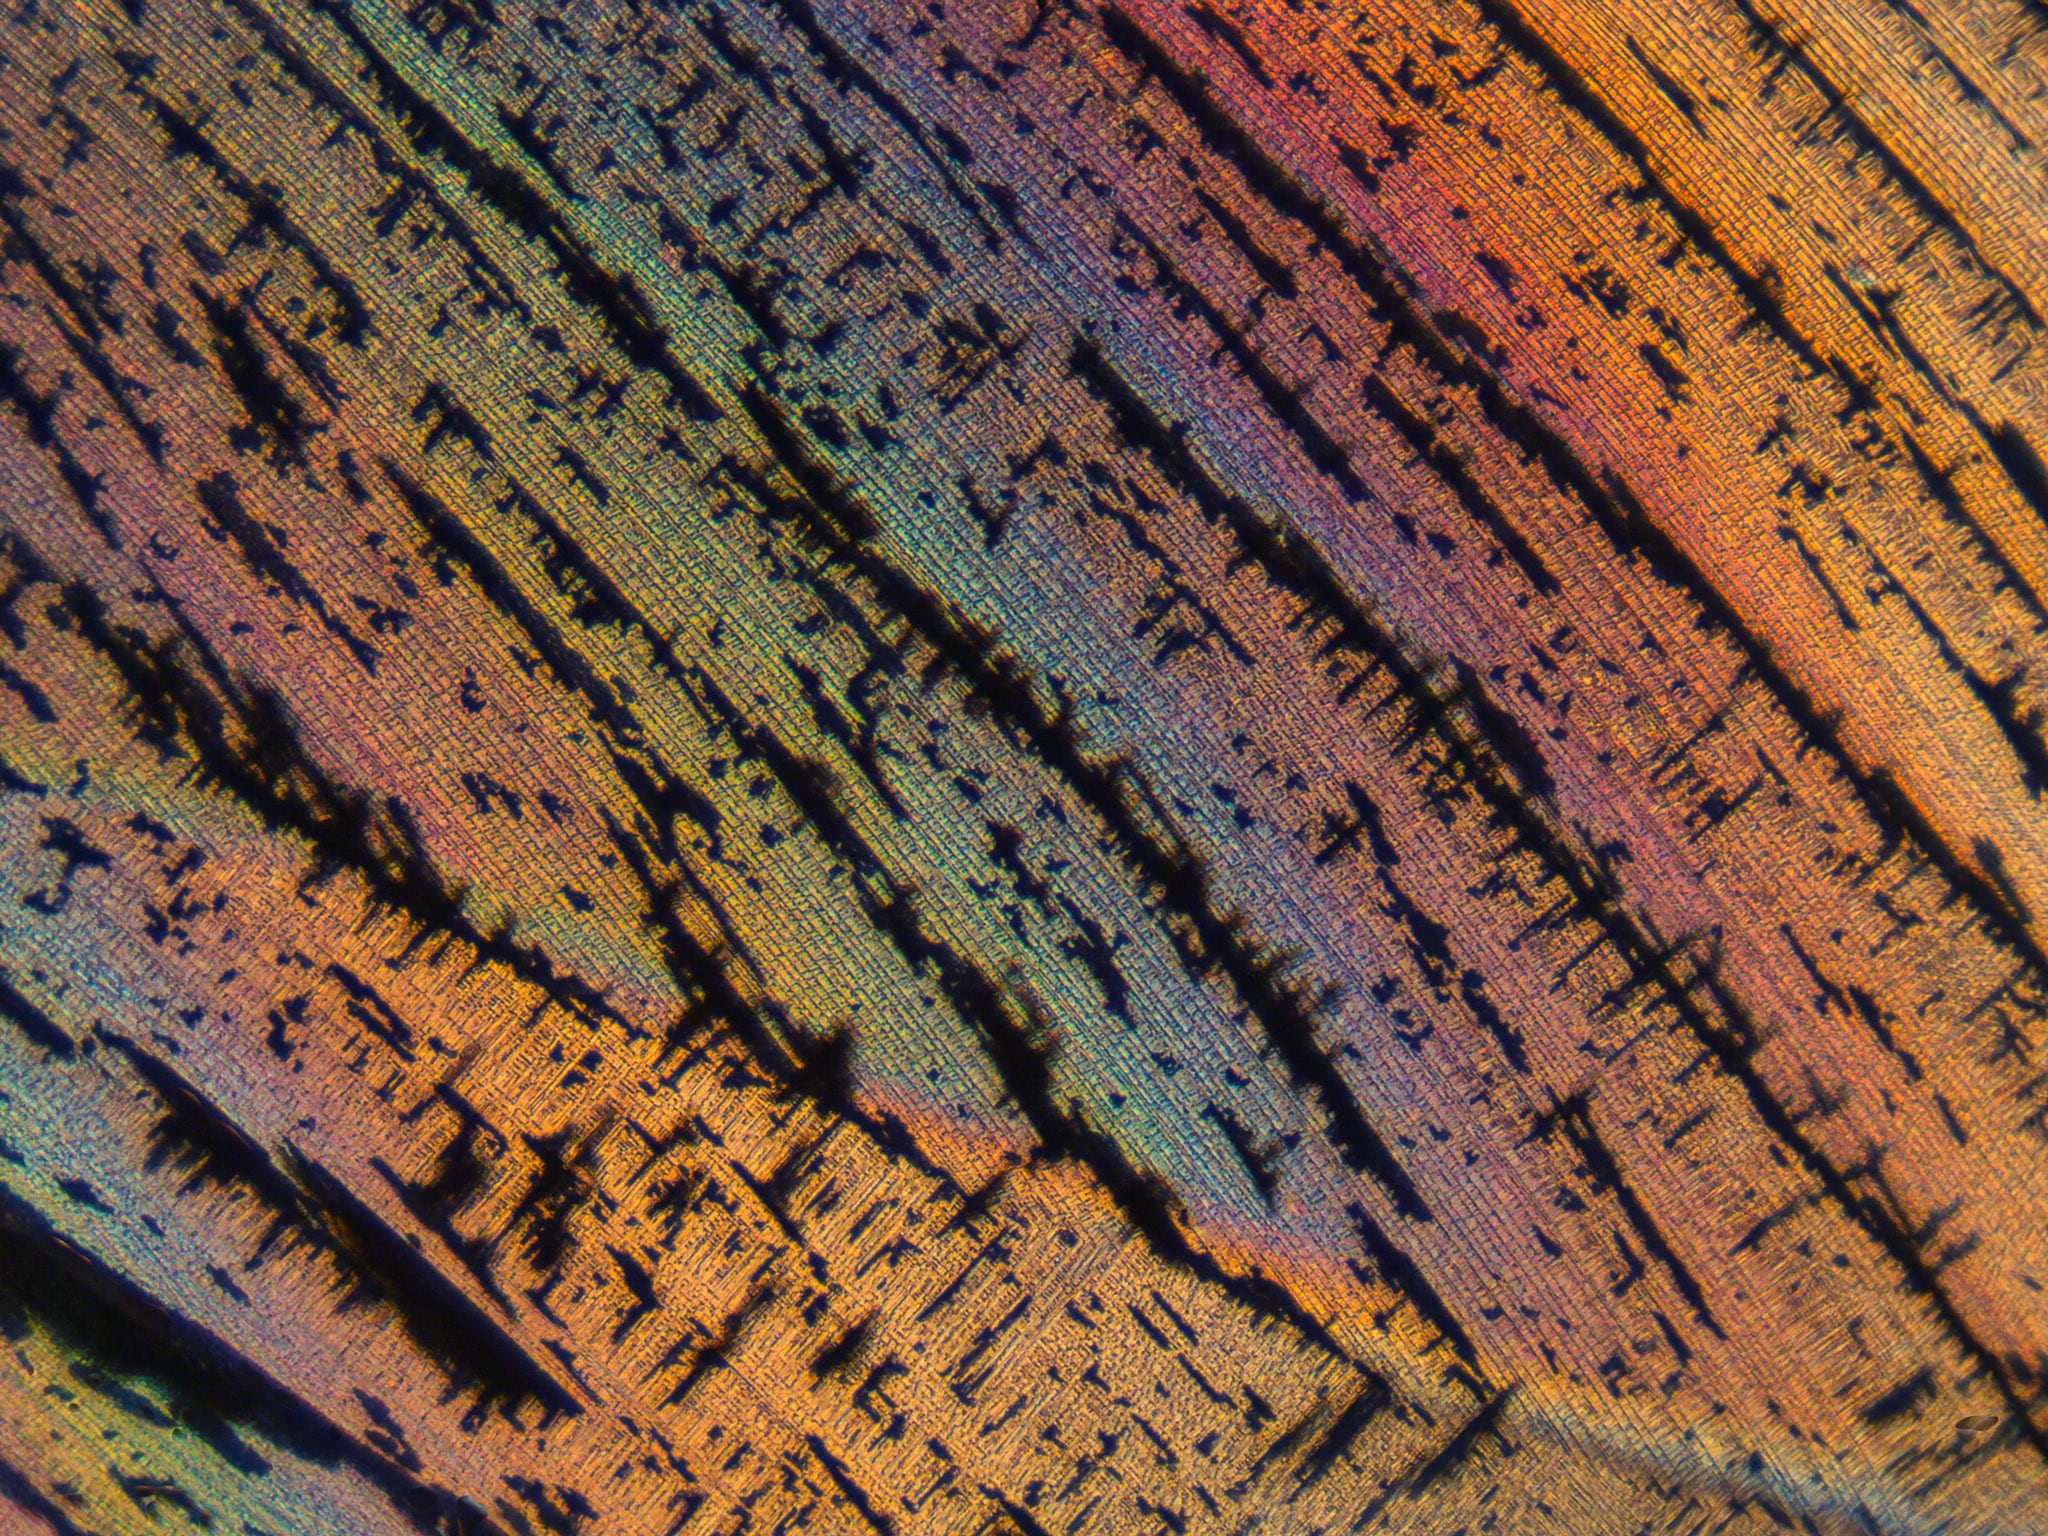 Microscopic crystals of urea and Epson salt at 10X. Part of the photomicrographs of crystals portfolio.